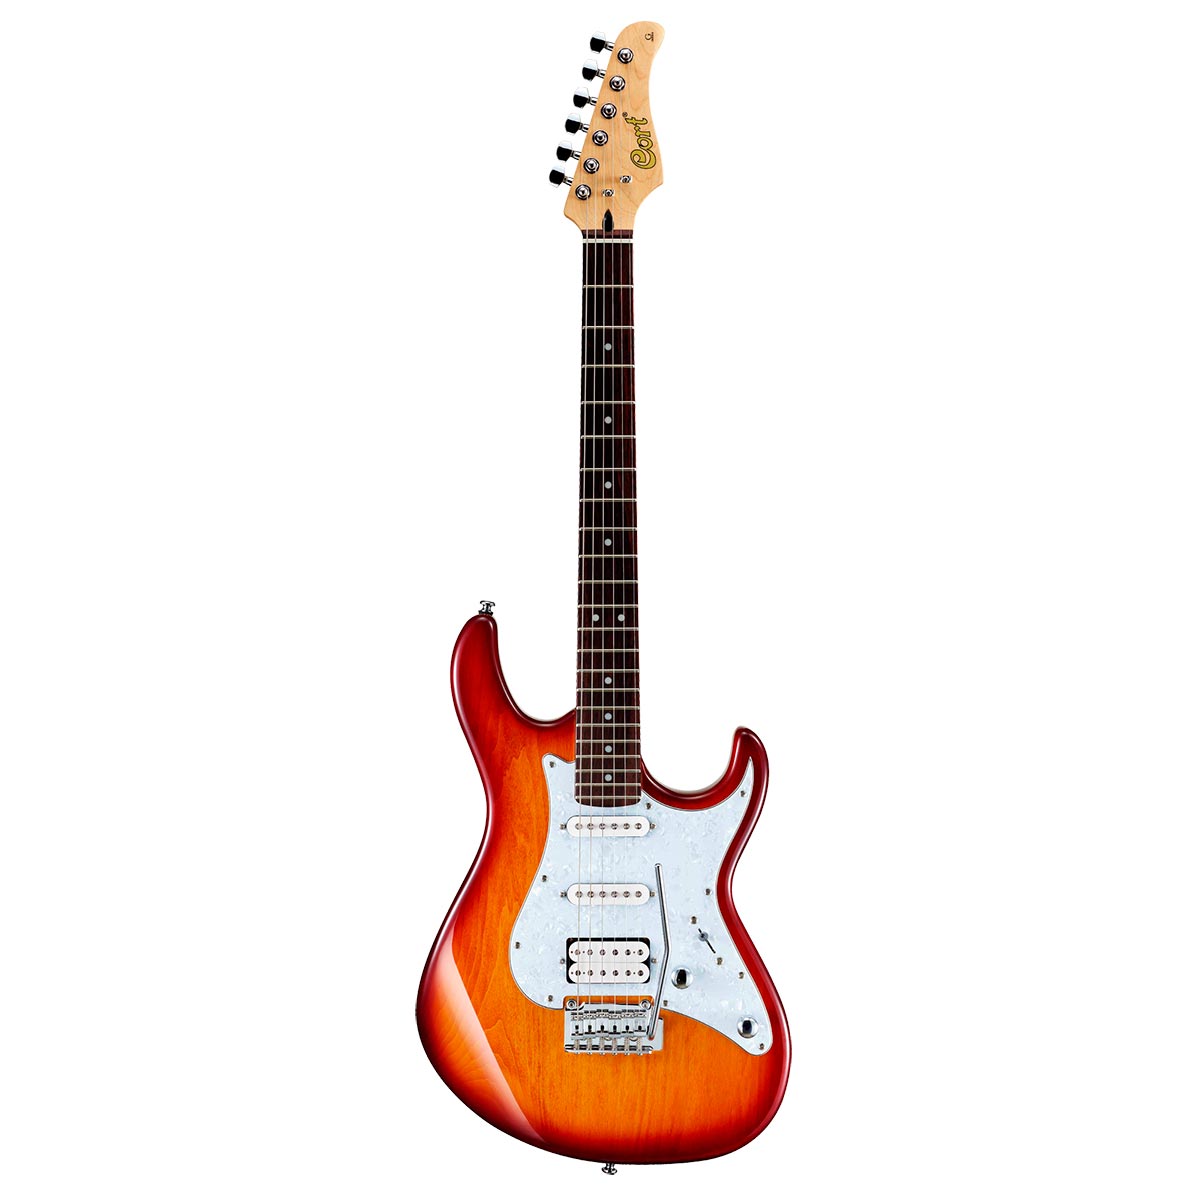 Cort G 250 TAB - Guitarra eléctrica tipo stratocaster